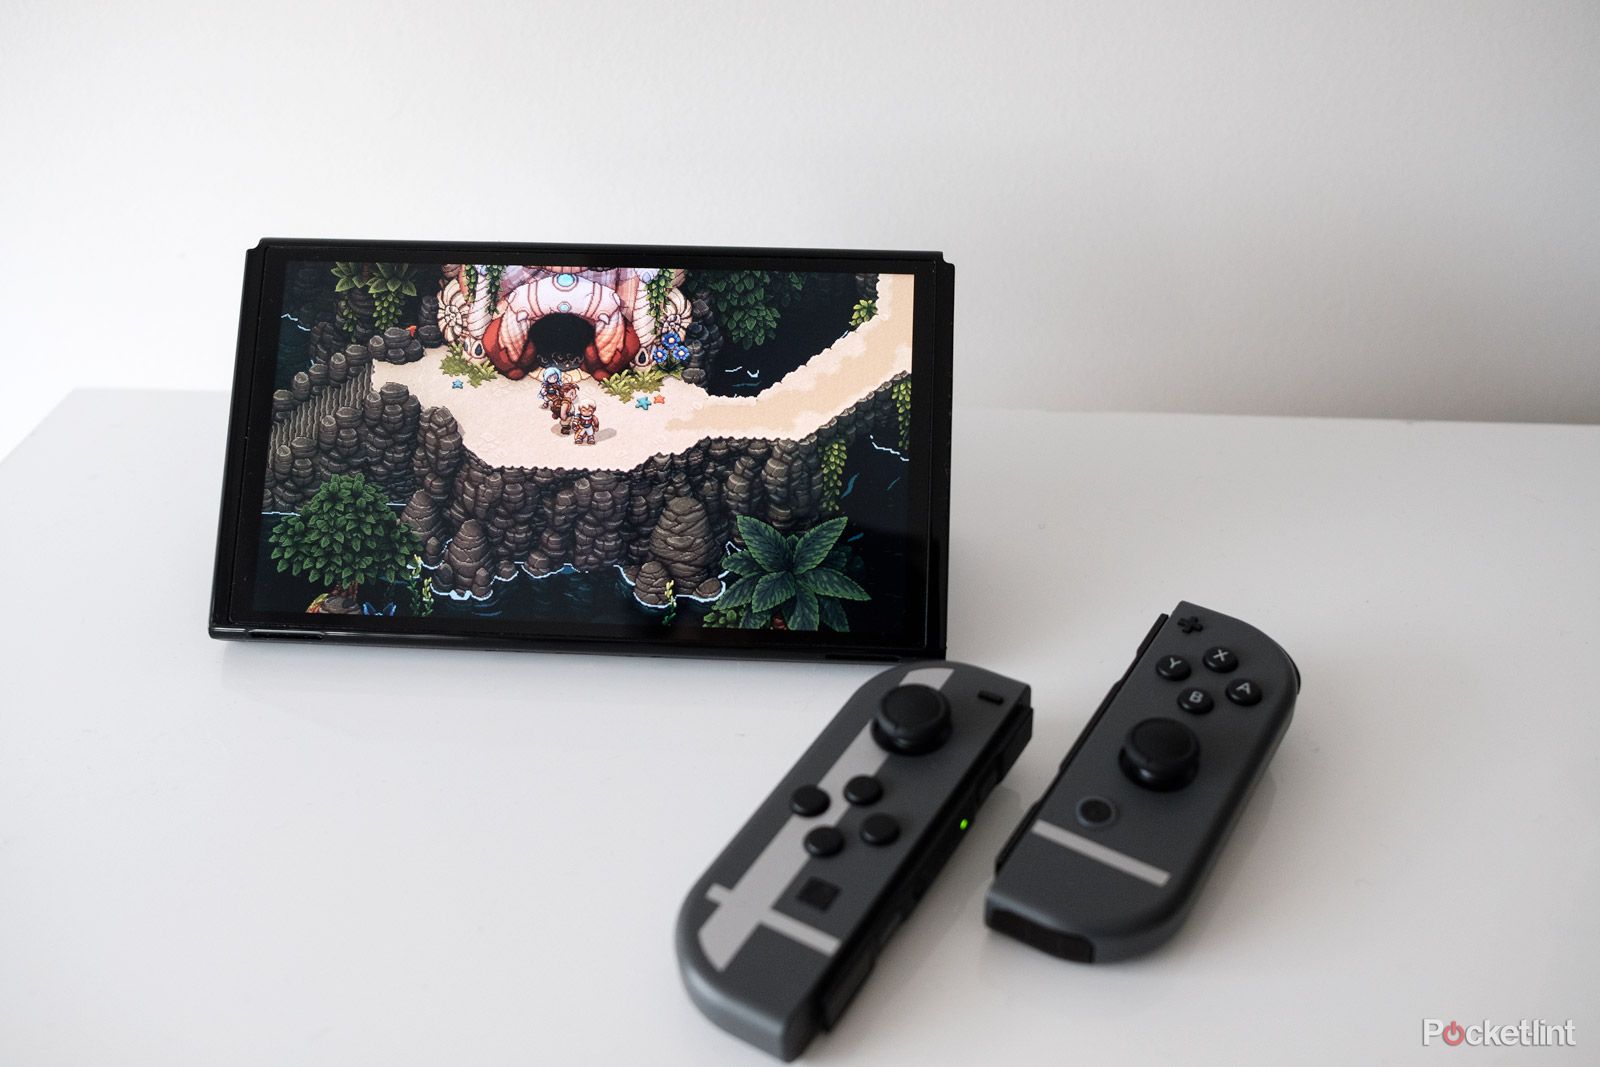 A Nintendo Switch OLED with Sea of Stars on the screen. The Joy-Con controllers are detached from the console.